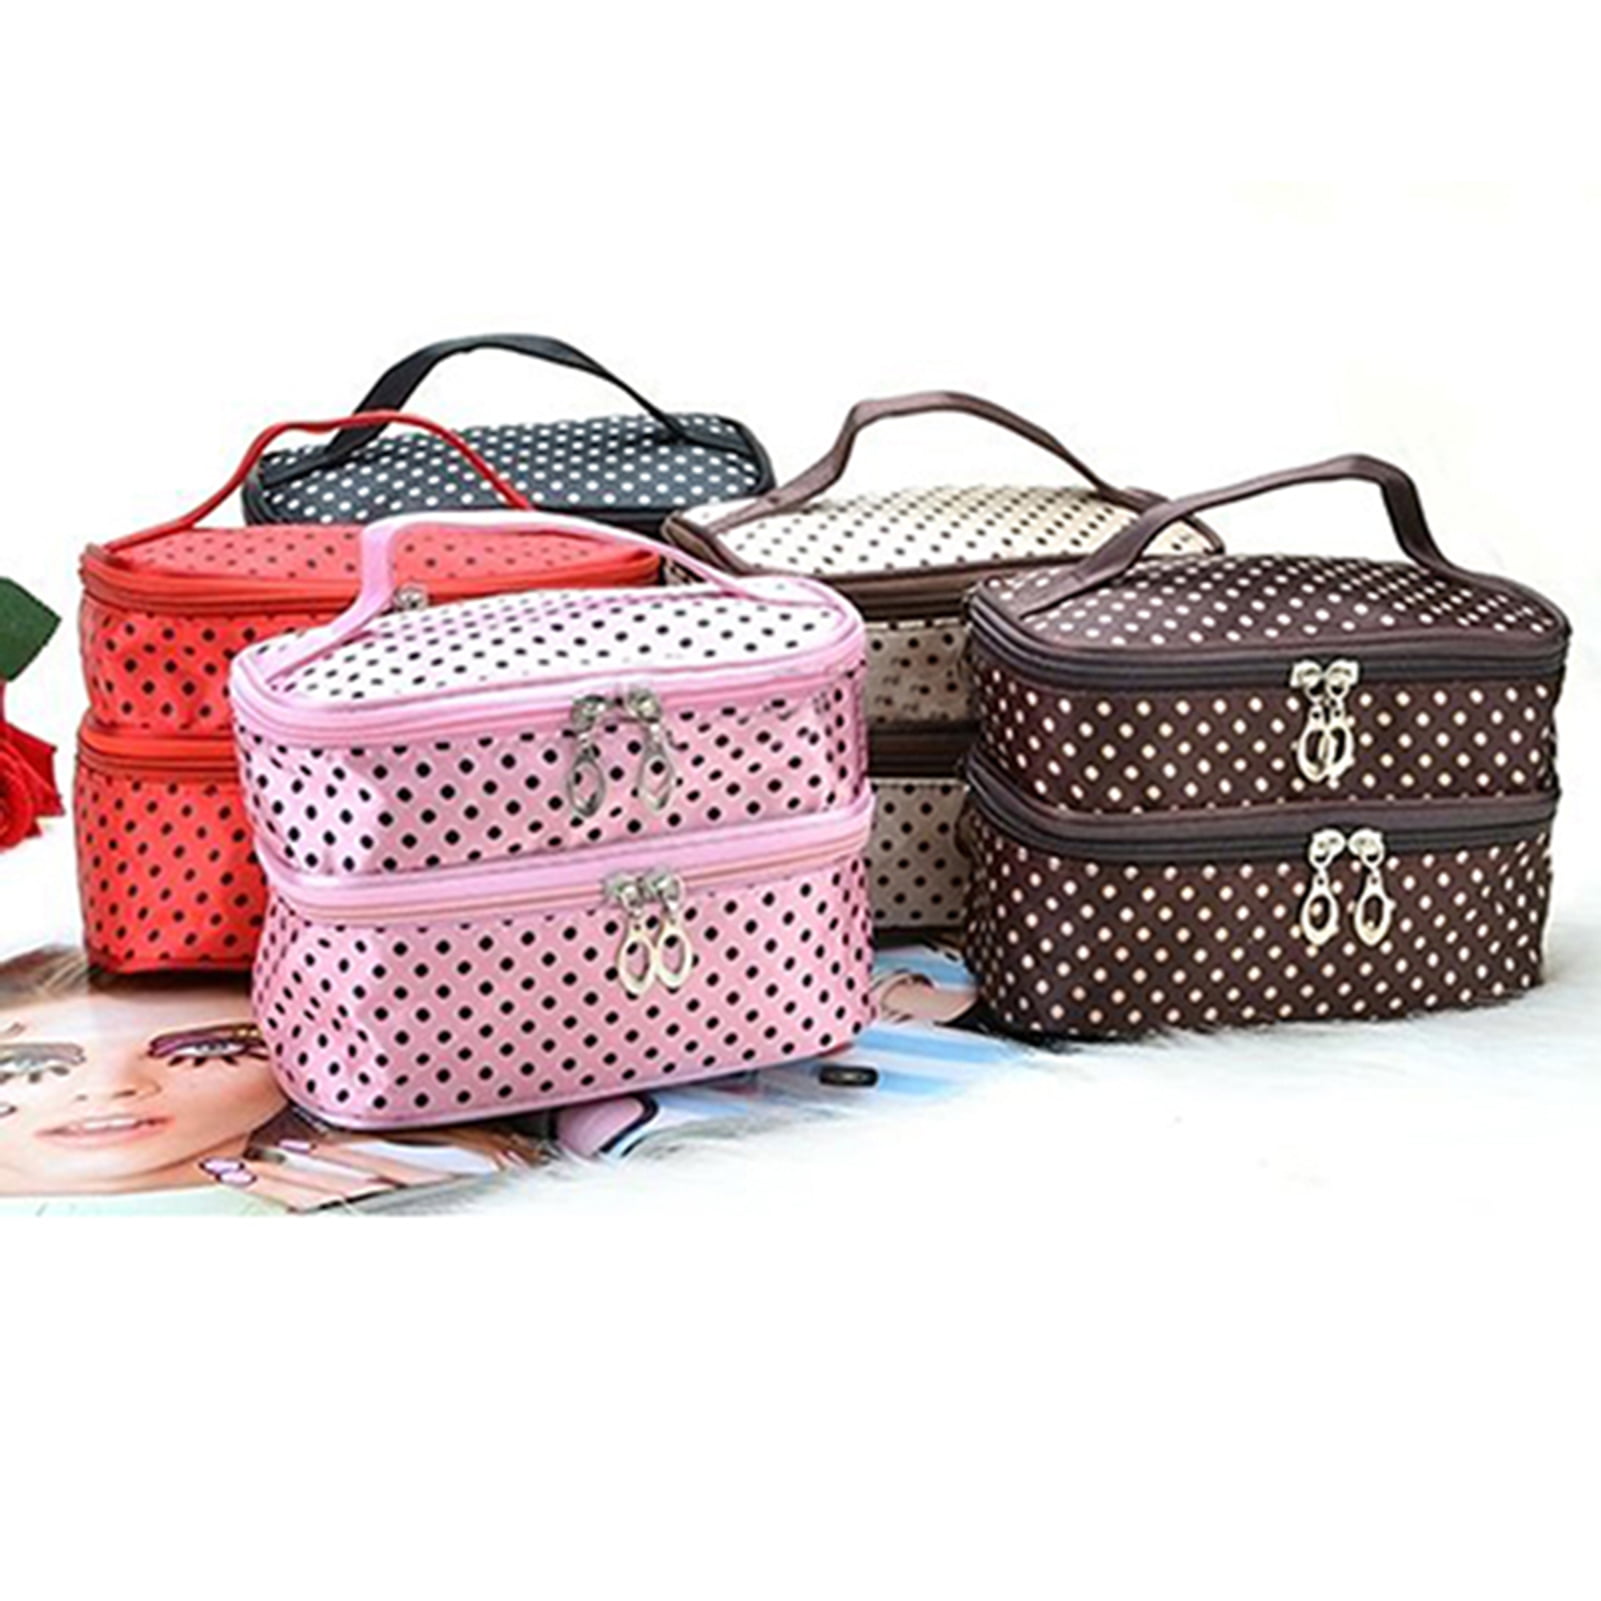 Yesbay Women Large Cosmetic Makeup Bag Case Travel Double-Deck